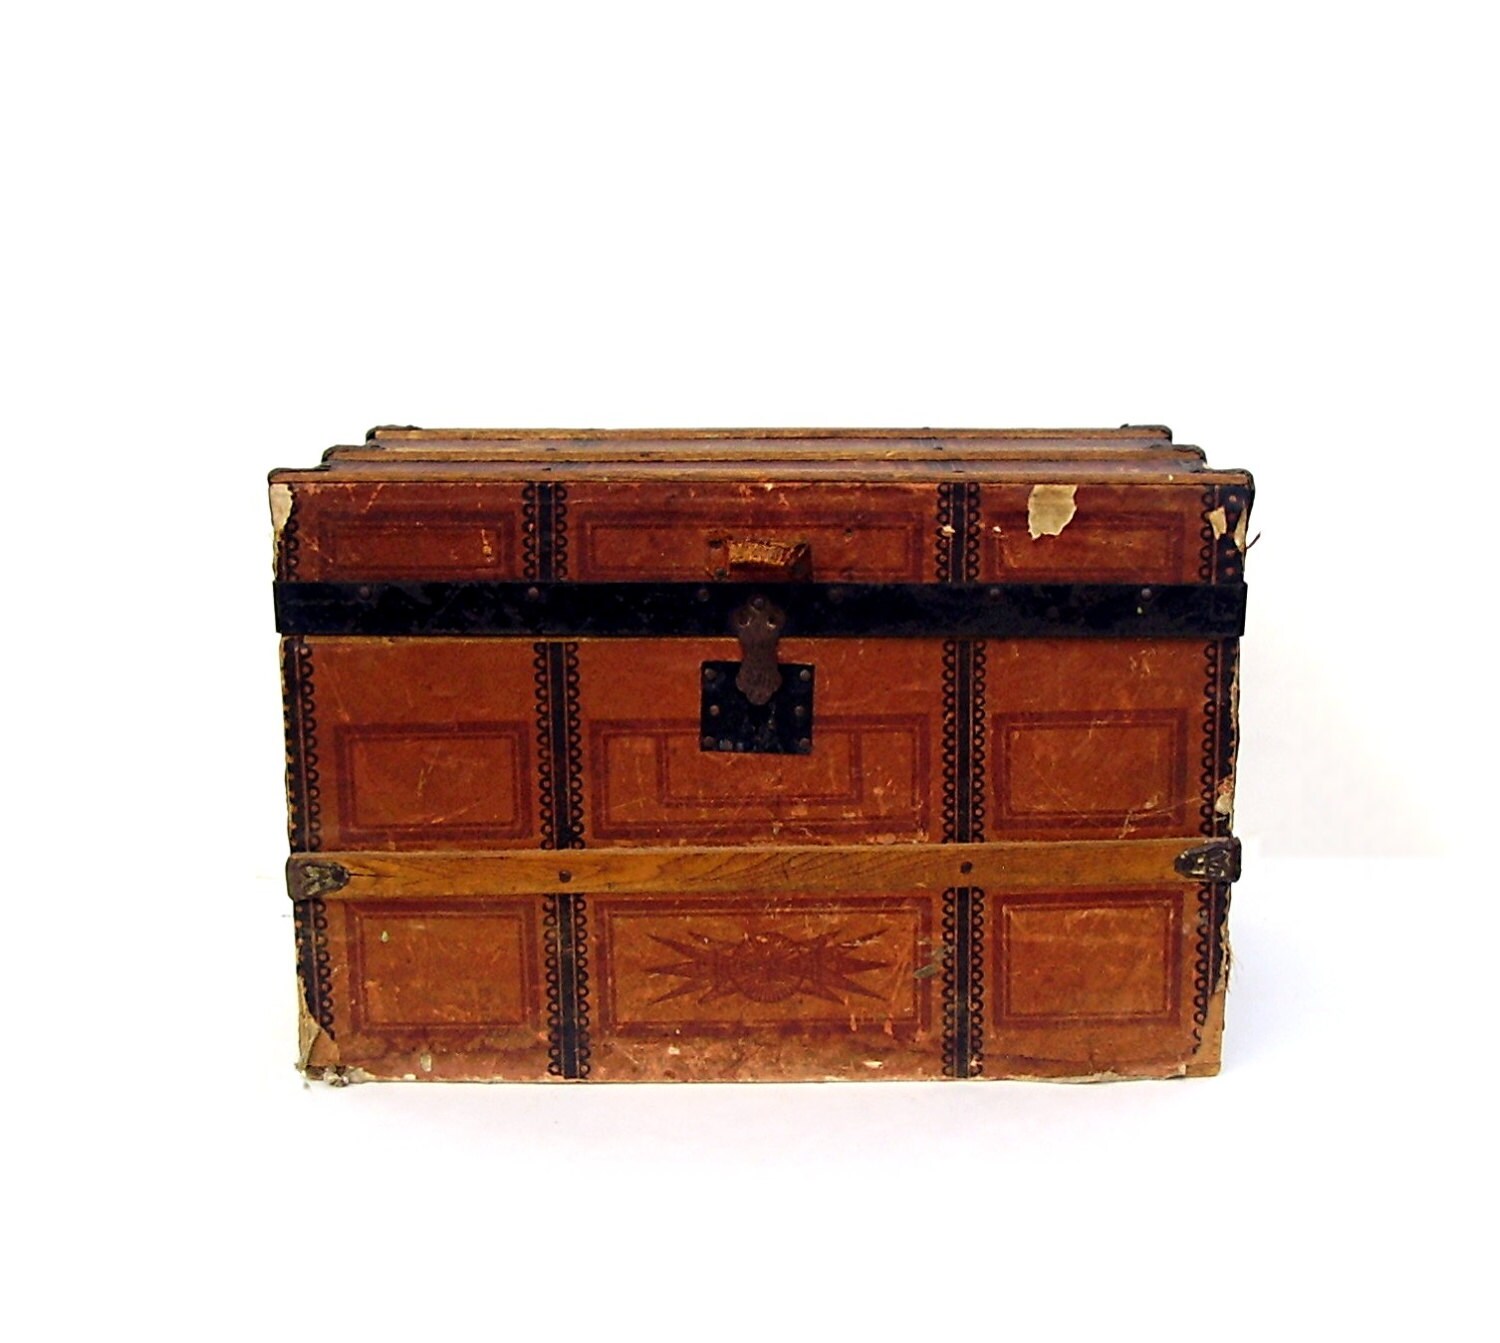 Antique Steamer Trunk Victorian Travel Trunk Paper Lithograph